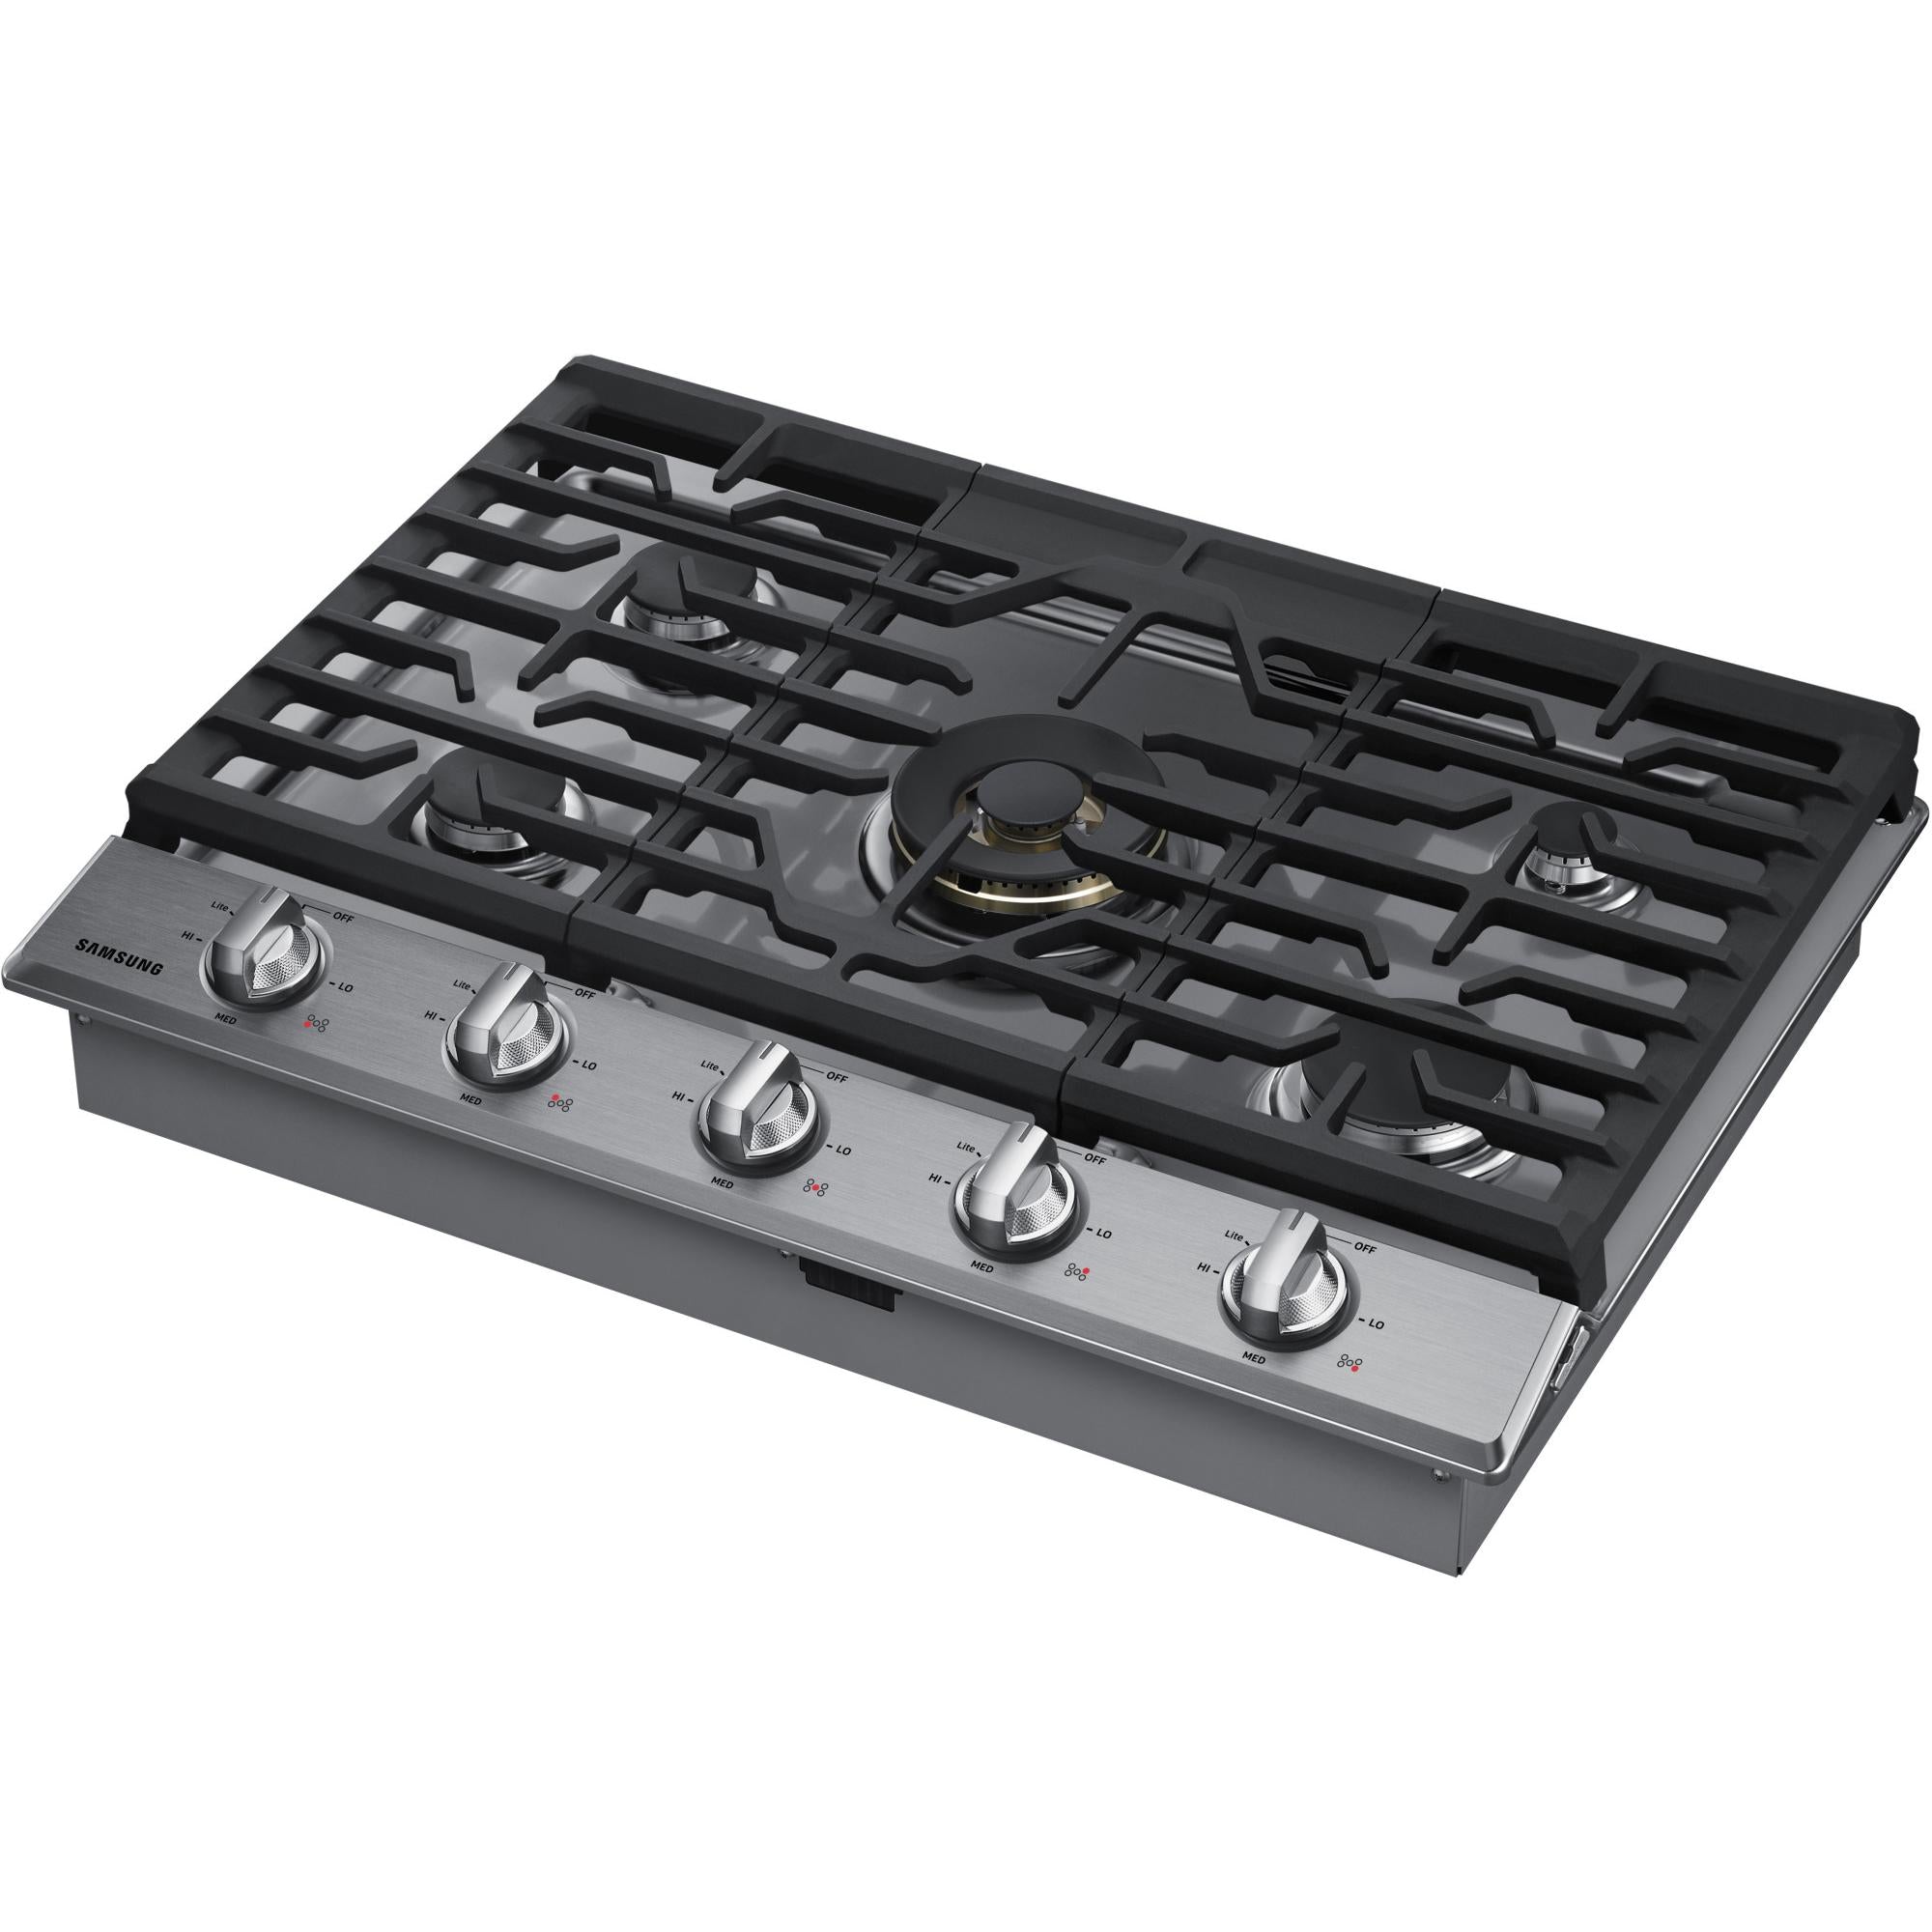 Samsung 36-inch Built-In Gas Cooktop NA36K7750TS/AA